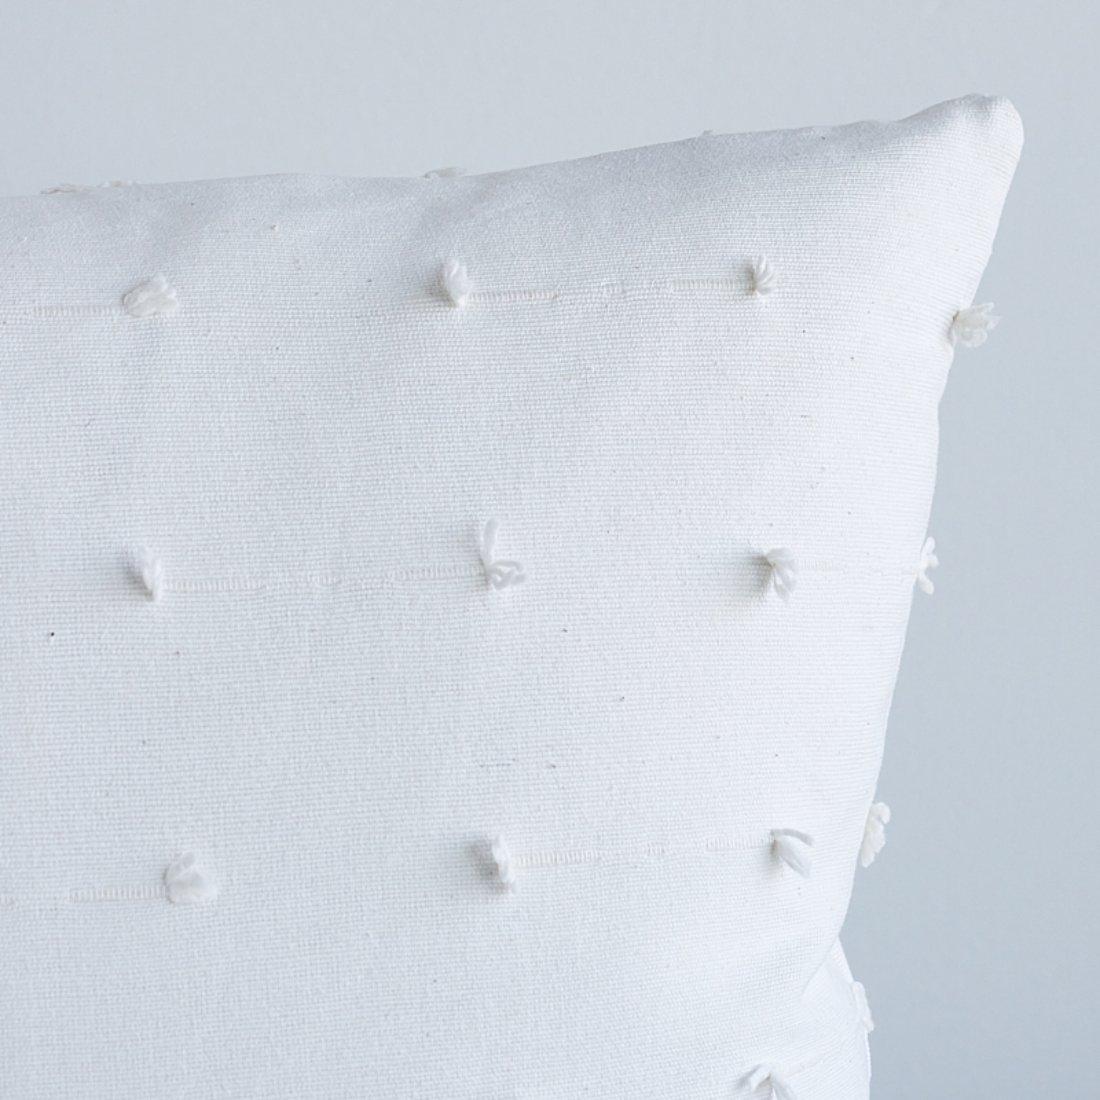 This pillow features Teton with a knife edge finish. Woven in India, Teton is a rustic, all-cotton variation of a fil-coupé with a wonderful handloomed look and charming textural detail. Pillow includes a feather/down fill insert and hidden zipper